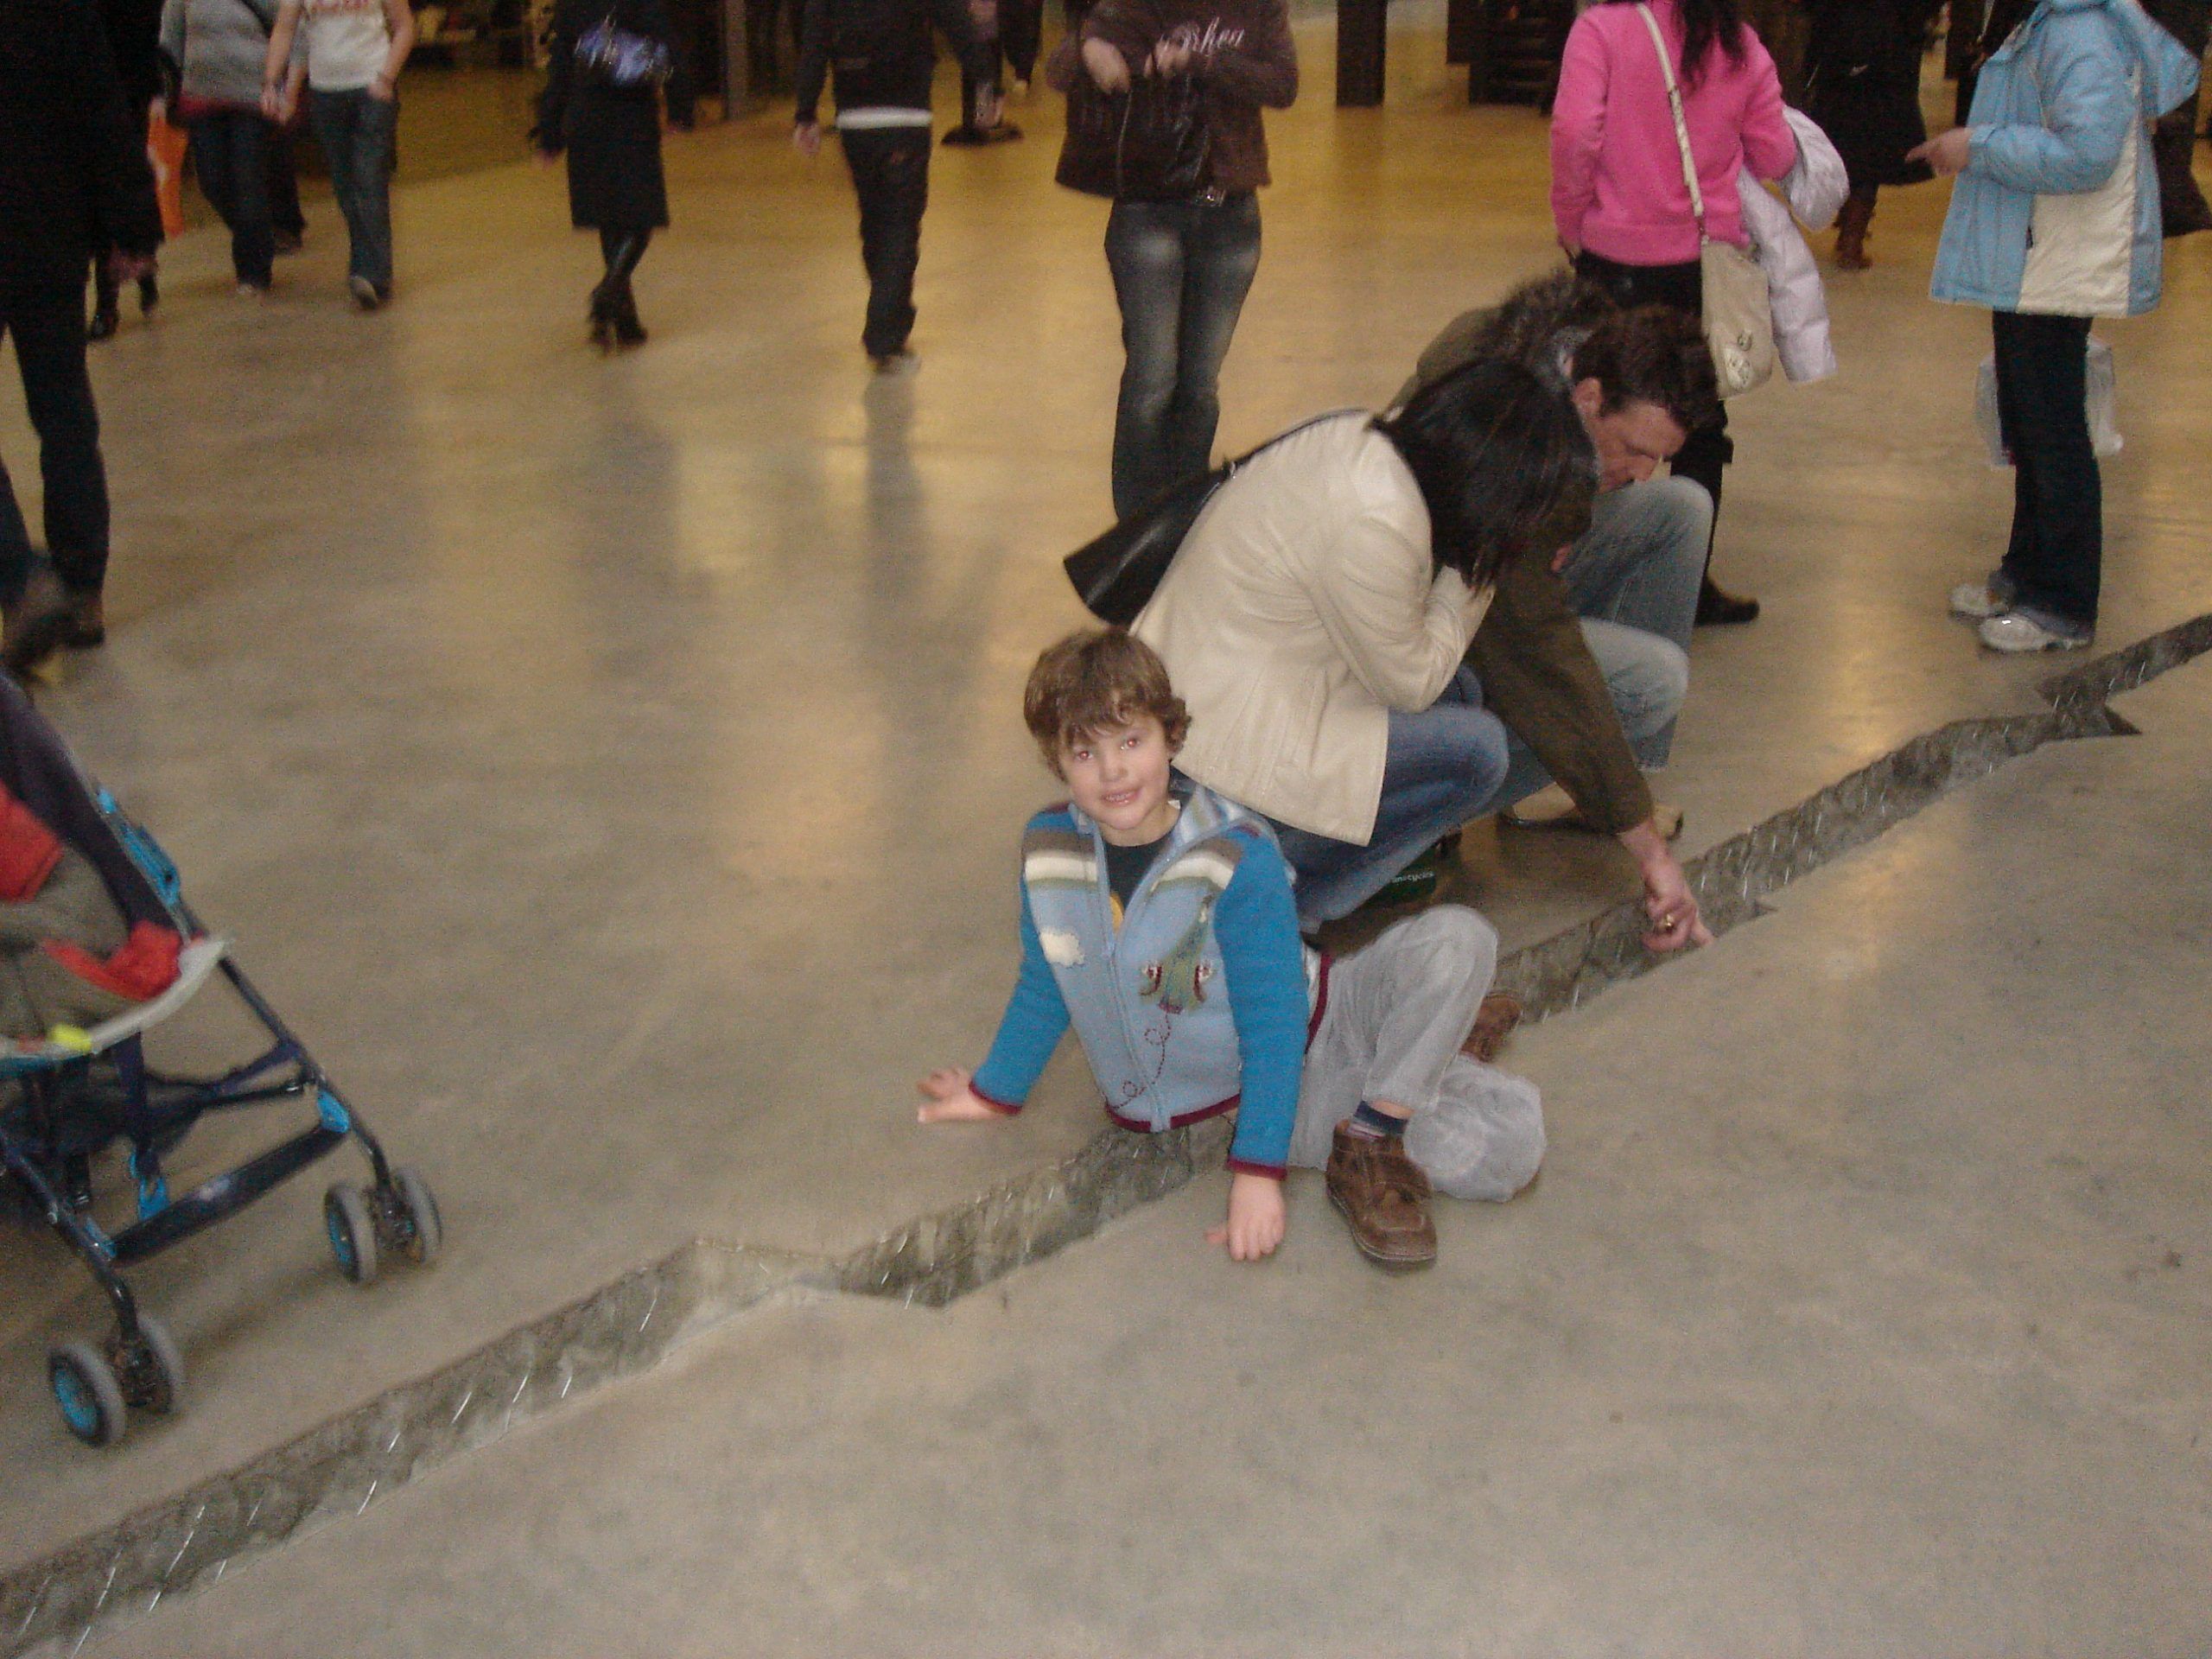 There's a crack in the concrete floor. A small boy straddles it and some adults are touching it. There are other visitors walking around.